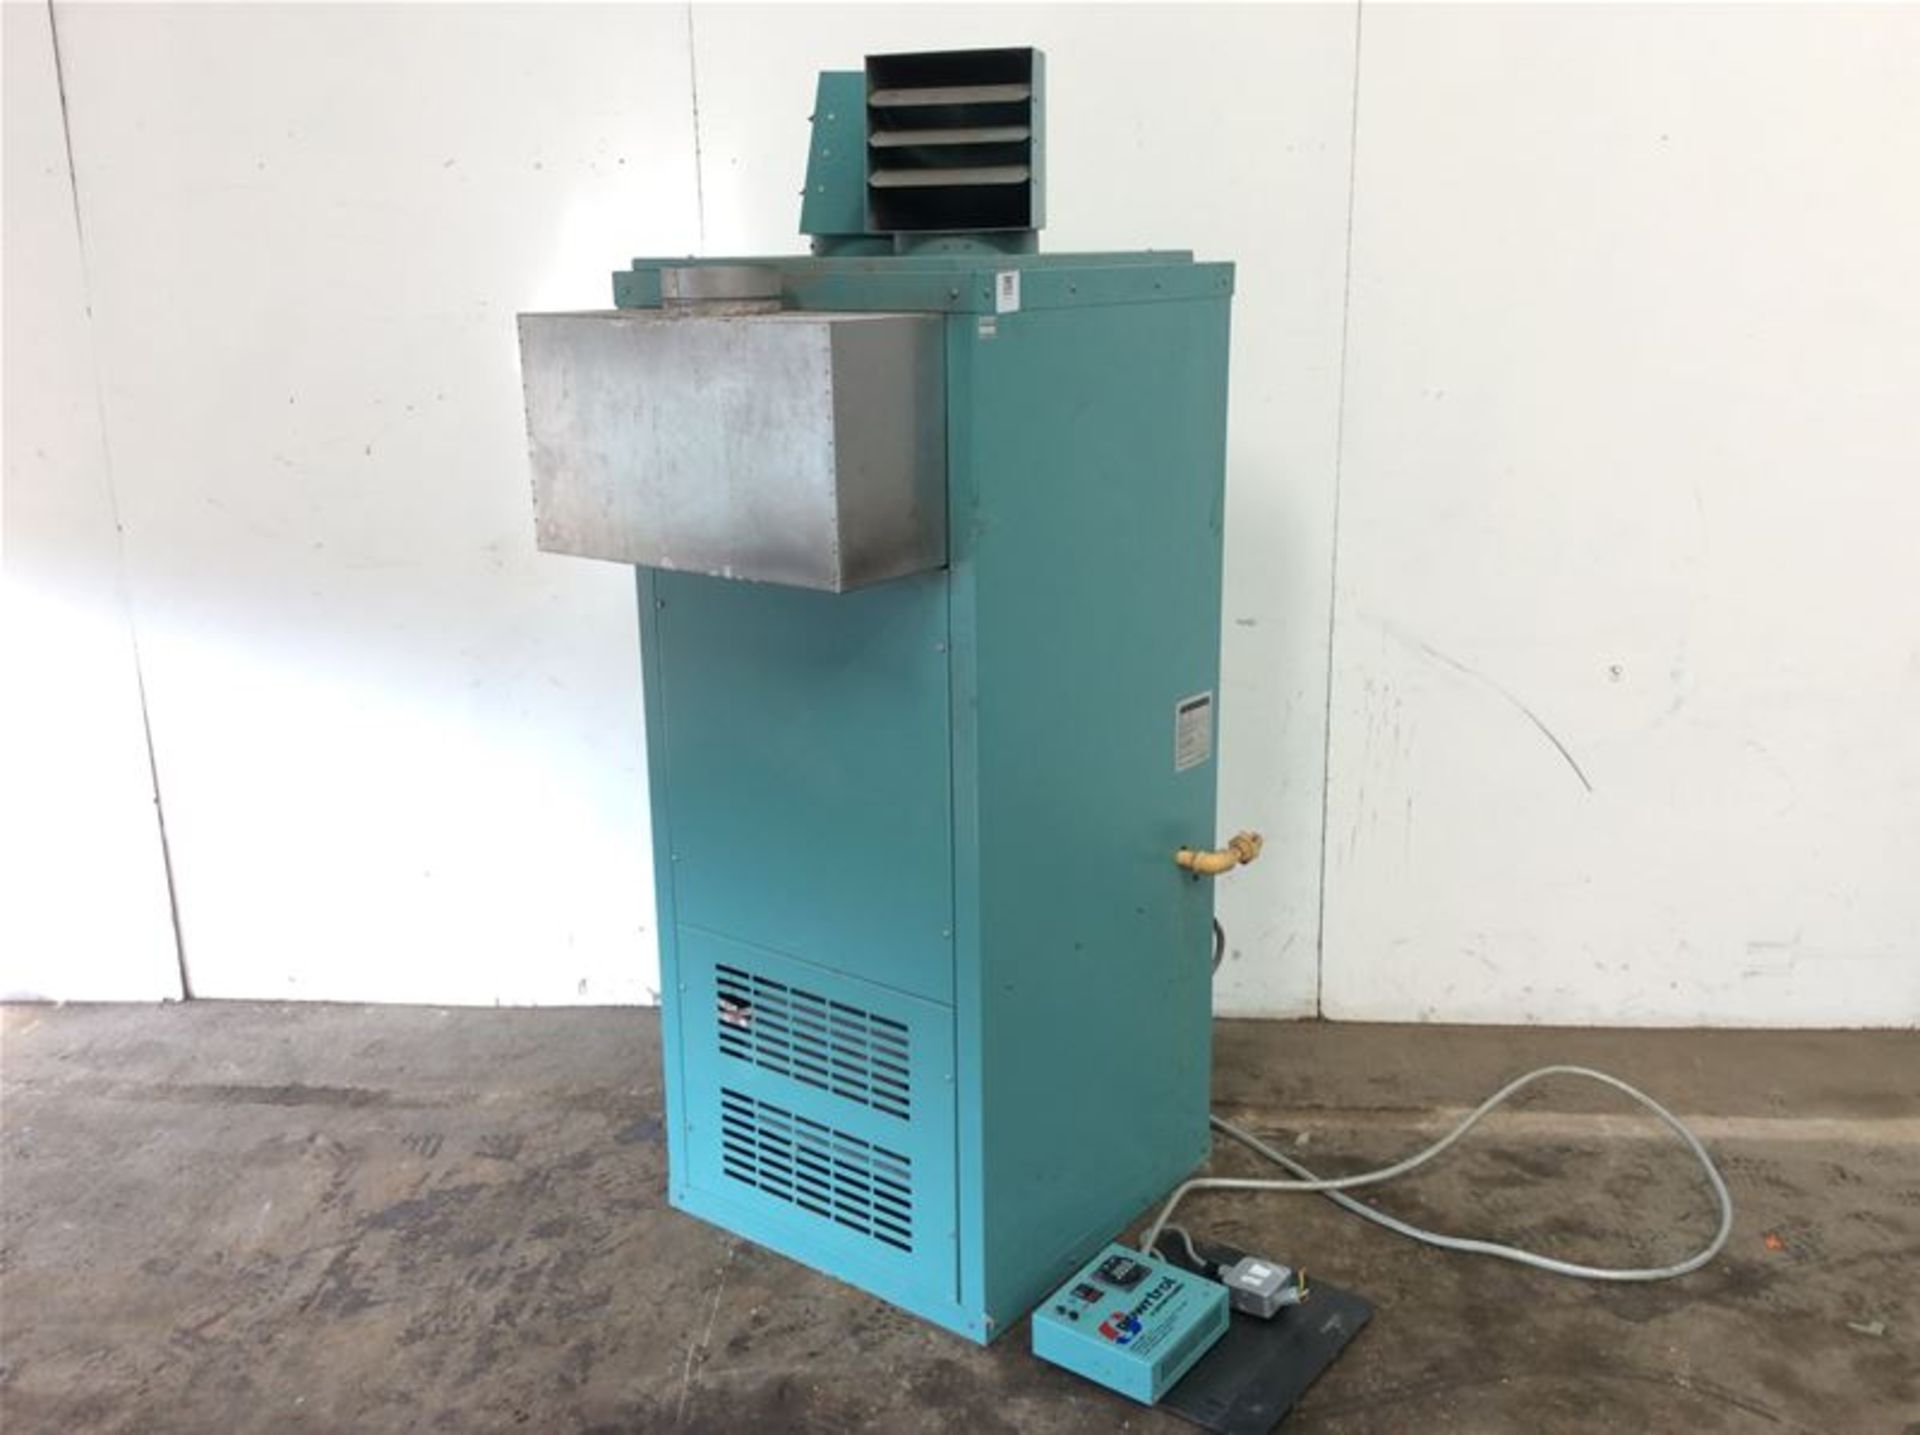 POWERMATIC PAG100UF/1 FREESTANDING NATURAL GAS FIRED INDUSTRIAL SPACE HEATER - 30KW